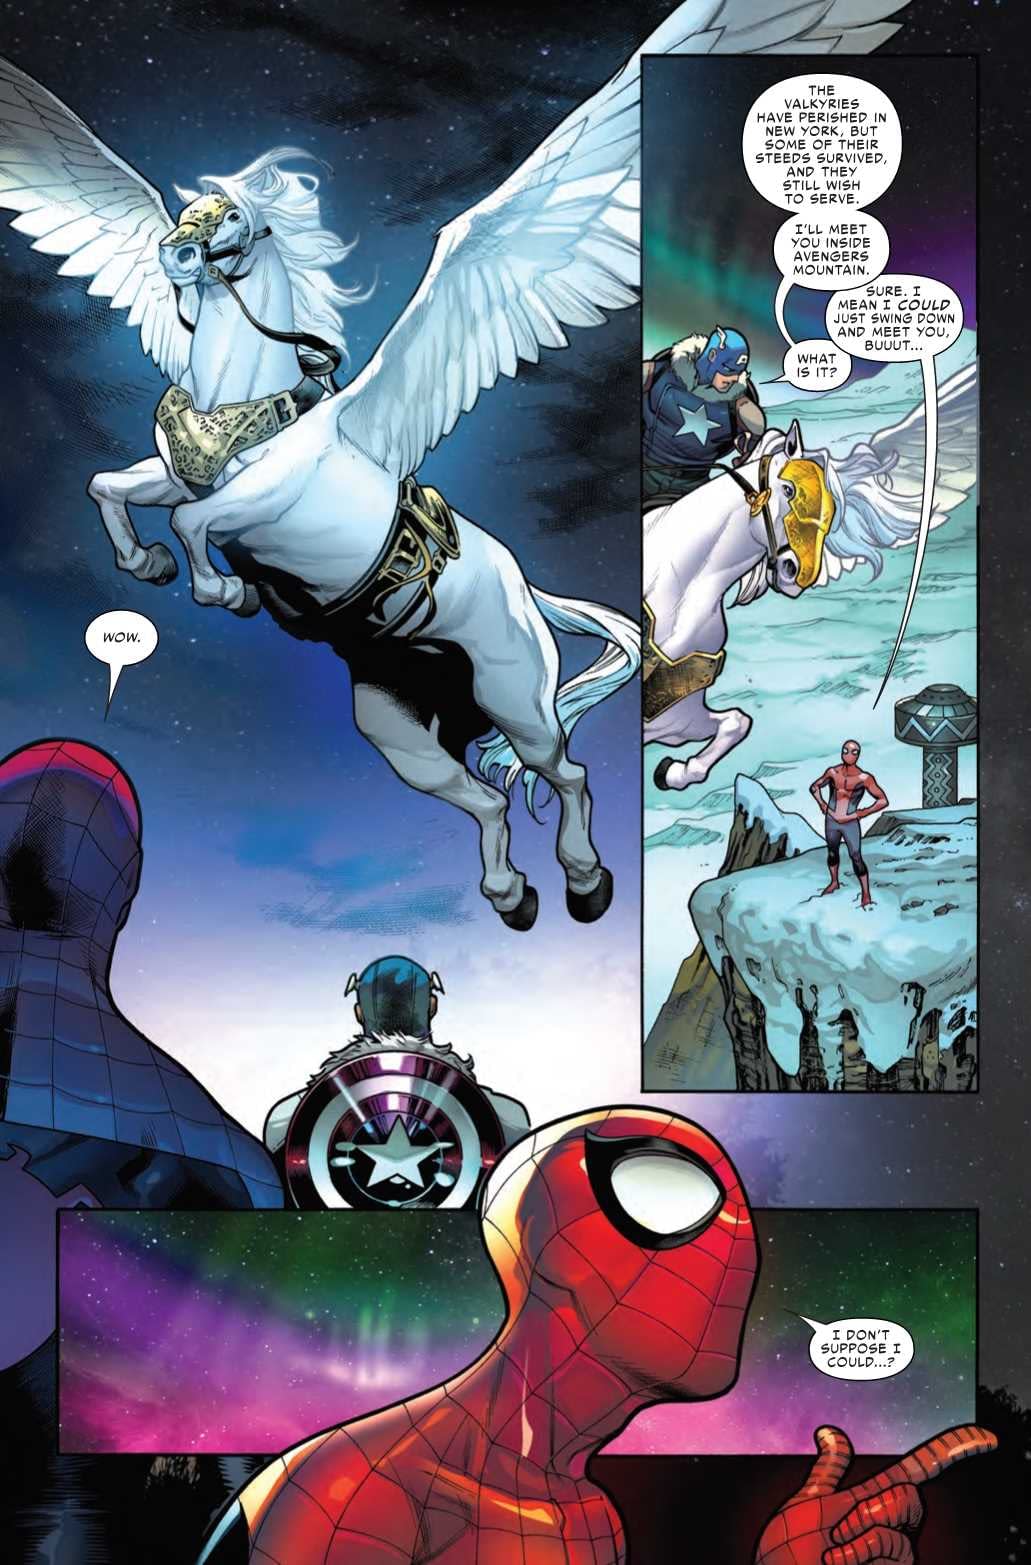 Spider-Man's Wish Fulfillment in War of the Realms: Strikeforce: Land of the Giants #1 (Preview)